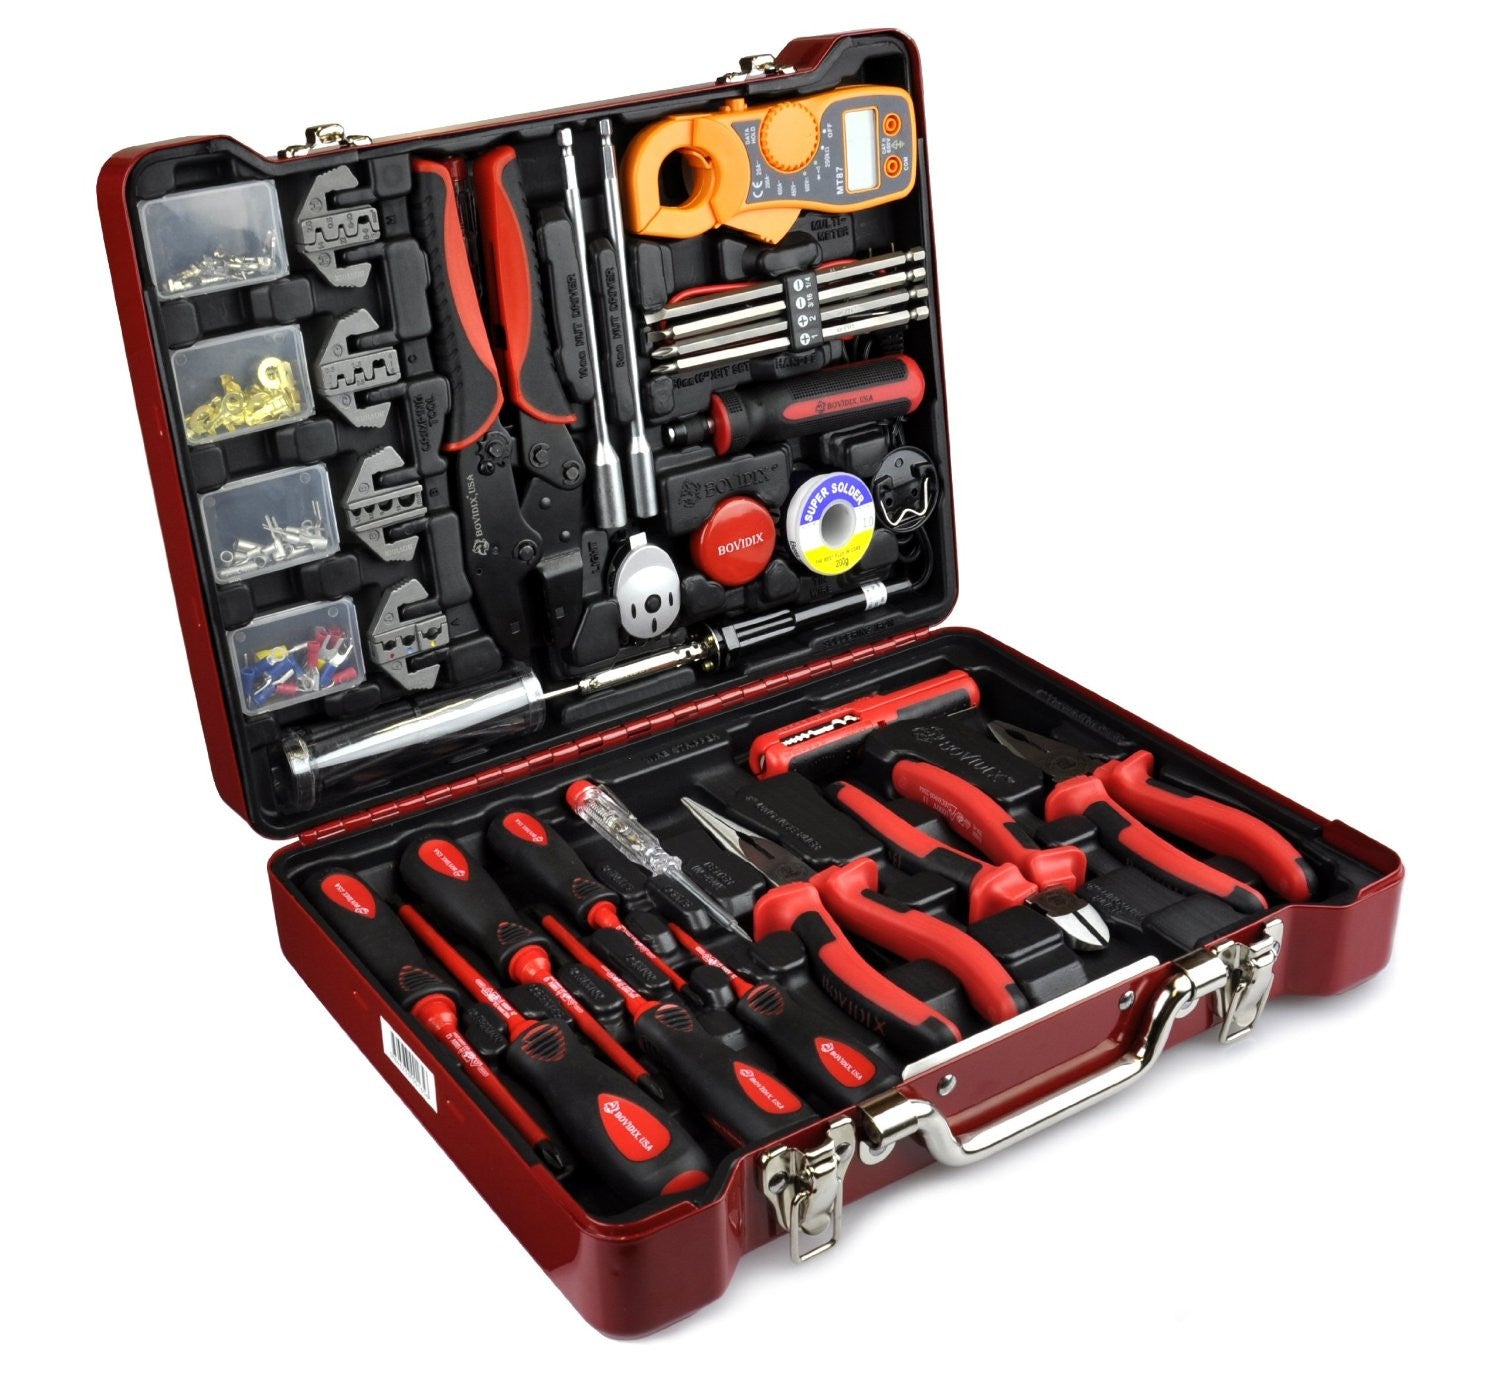 Insulated Tools Starter Kit | Electrician Hand Tools Set of 8